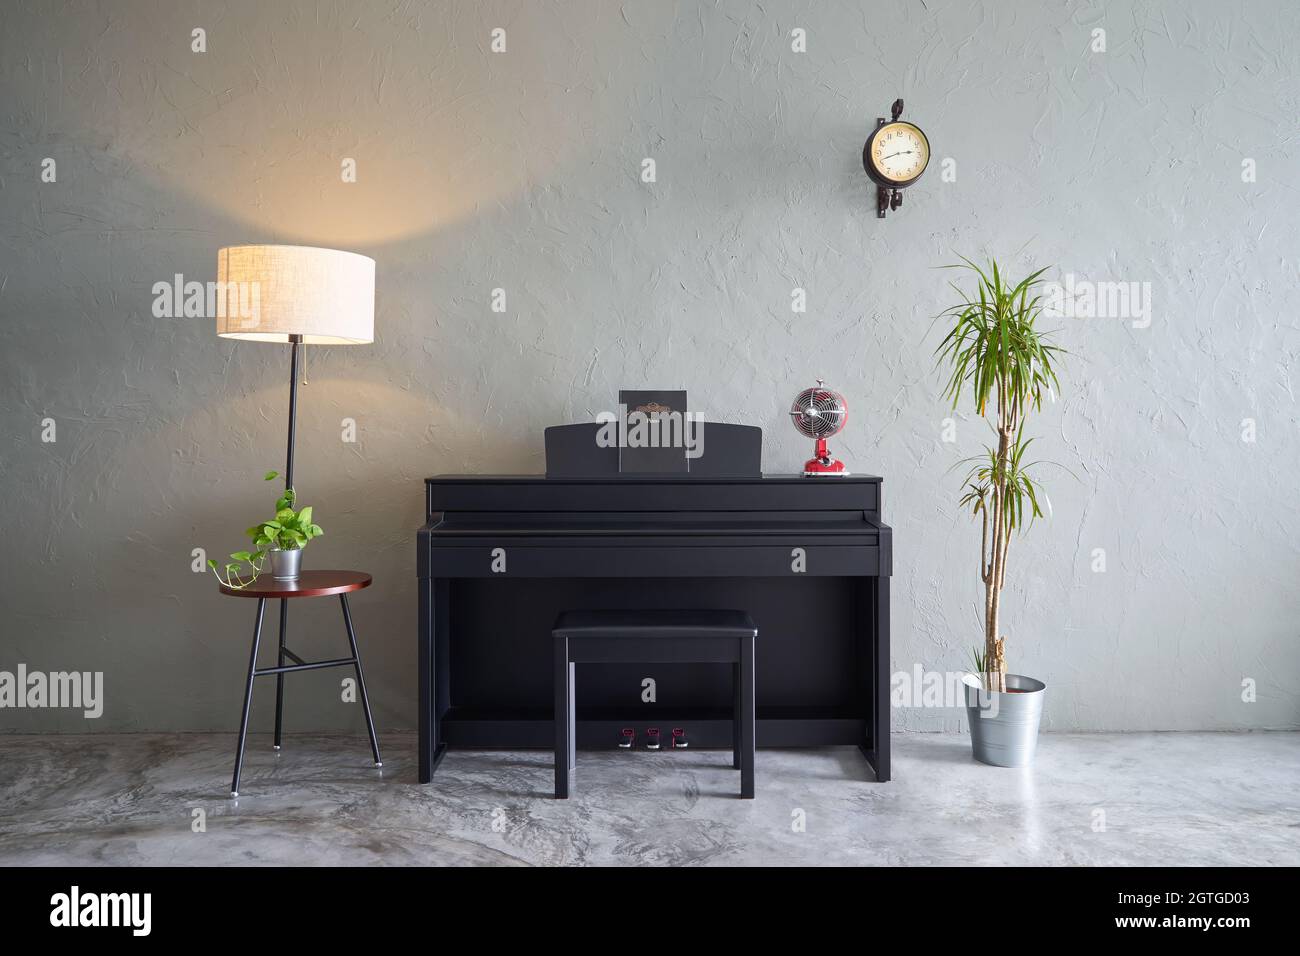 Piano With Decor Against Wall Stock Photo - Alamy